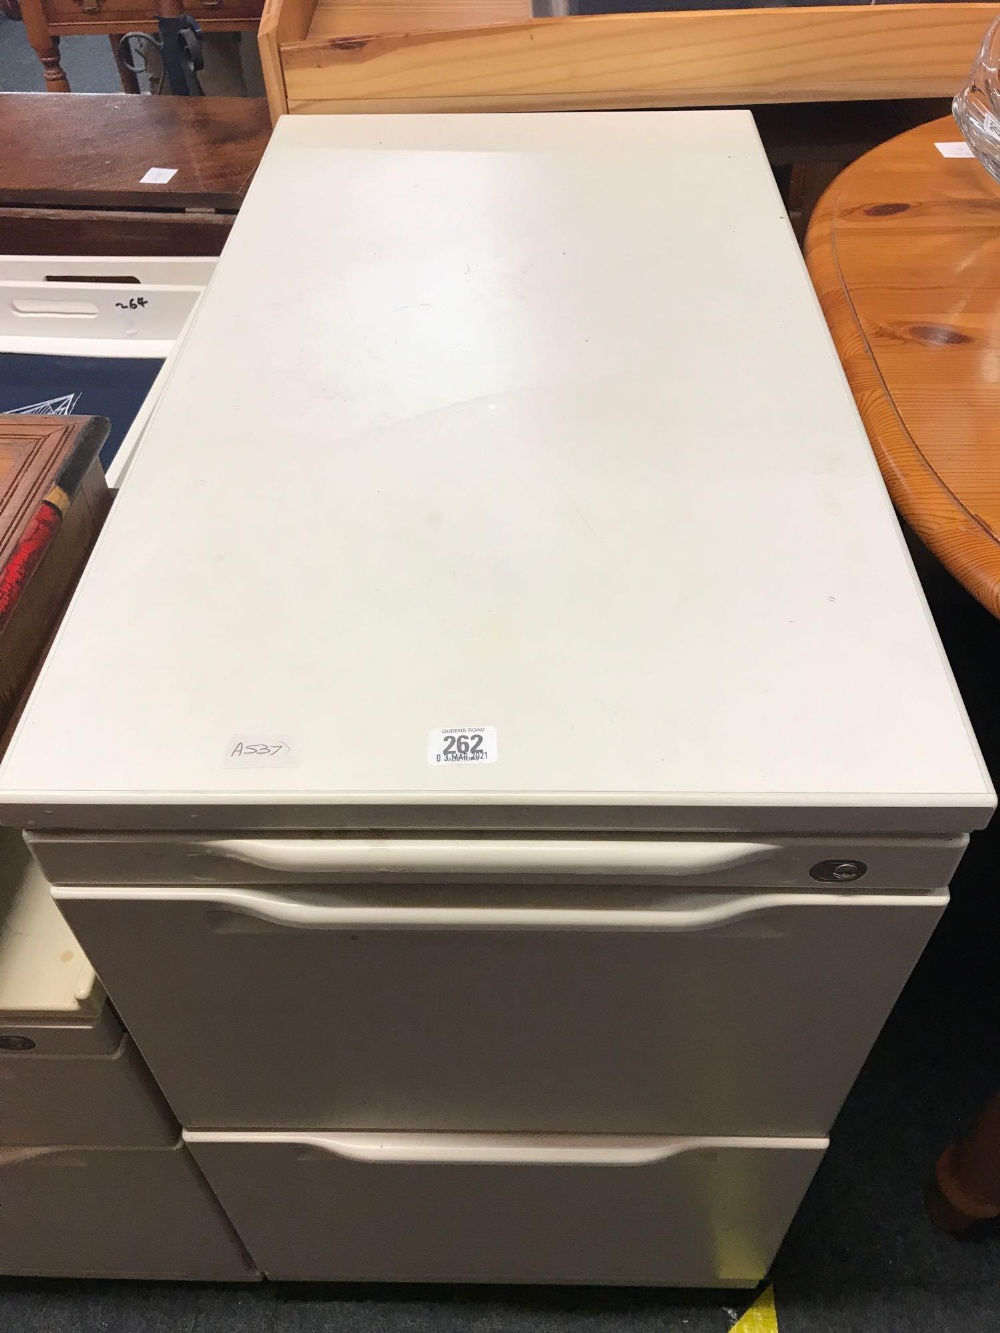 METAL FILING CABINET WITH 2 DEEP DRAWERS AND ORGANISING TRAY ABOVE - Image 2 of 2